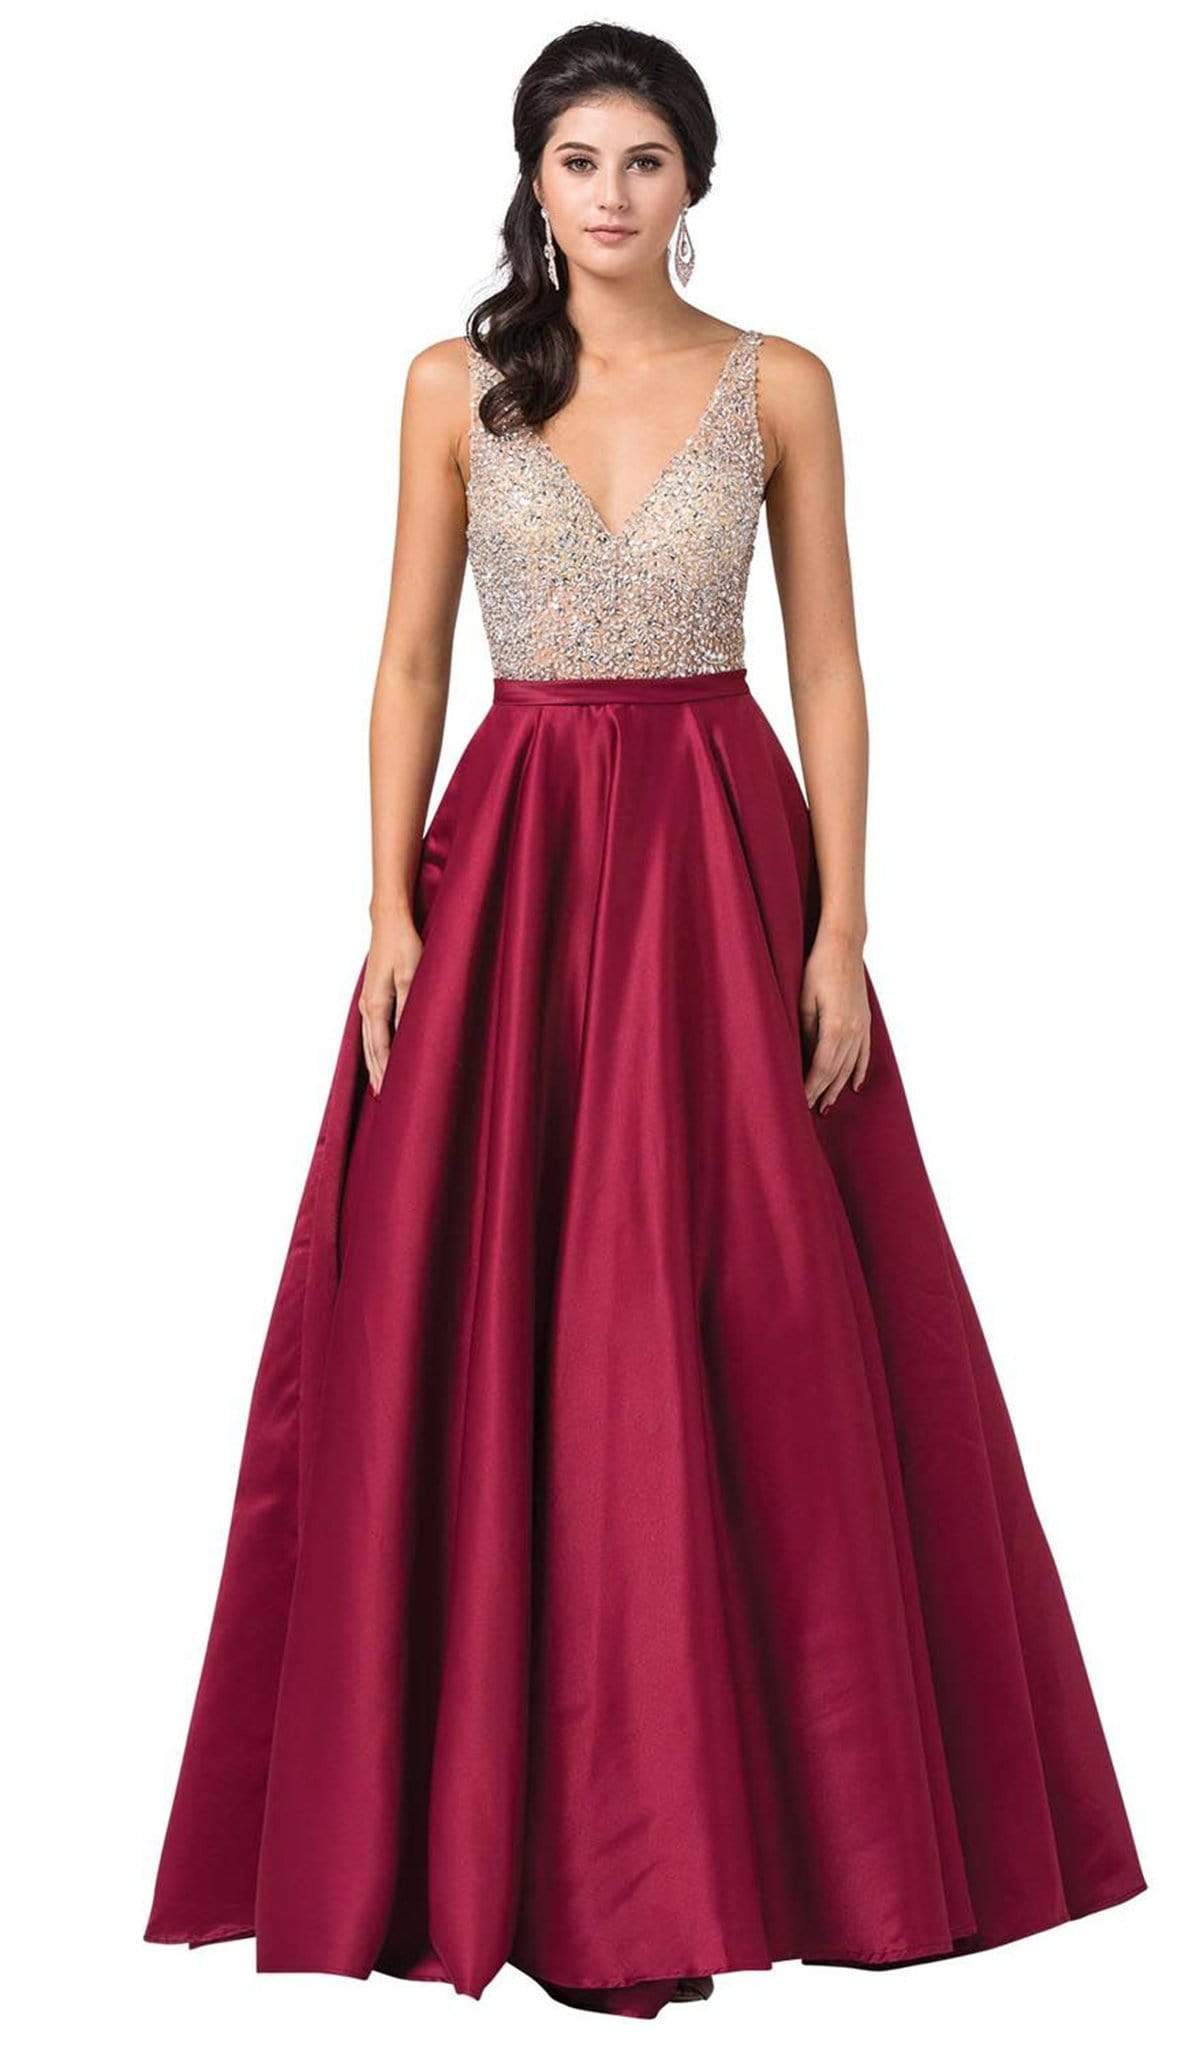 Dancing Queen - 2568 Embellished Plunging V-neck Ballgown Special Occasion Dress XS / Burgundy